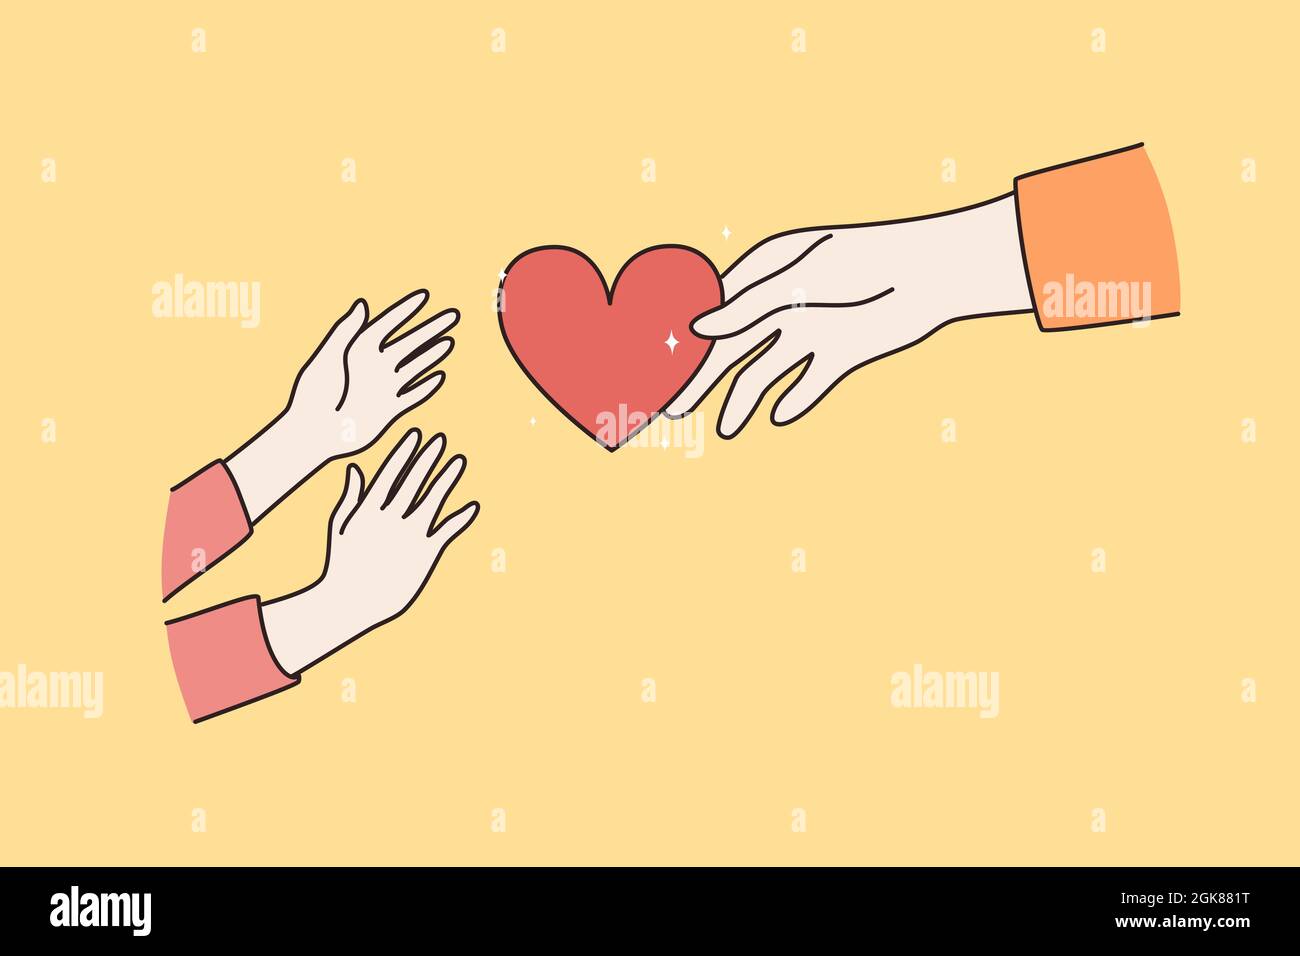 Taking care and parent child love concept. Hands of adult person giving red heart to childish hands reaching for it over yellow background vector illustration  Stock Vector